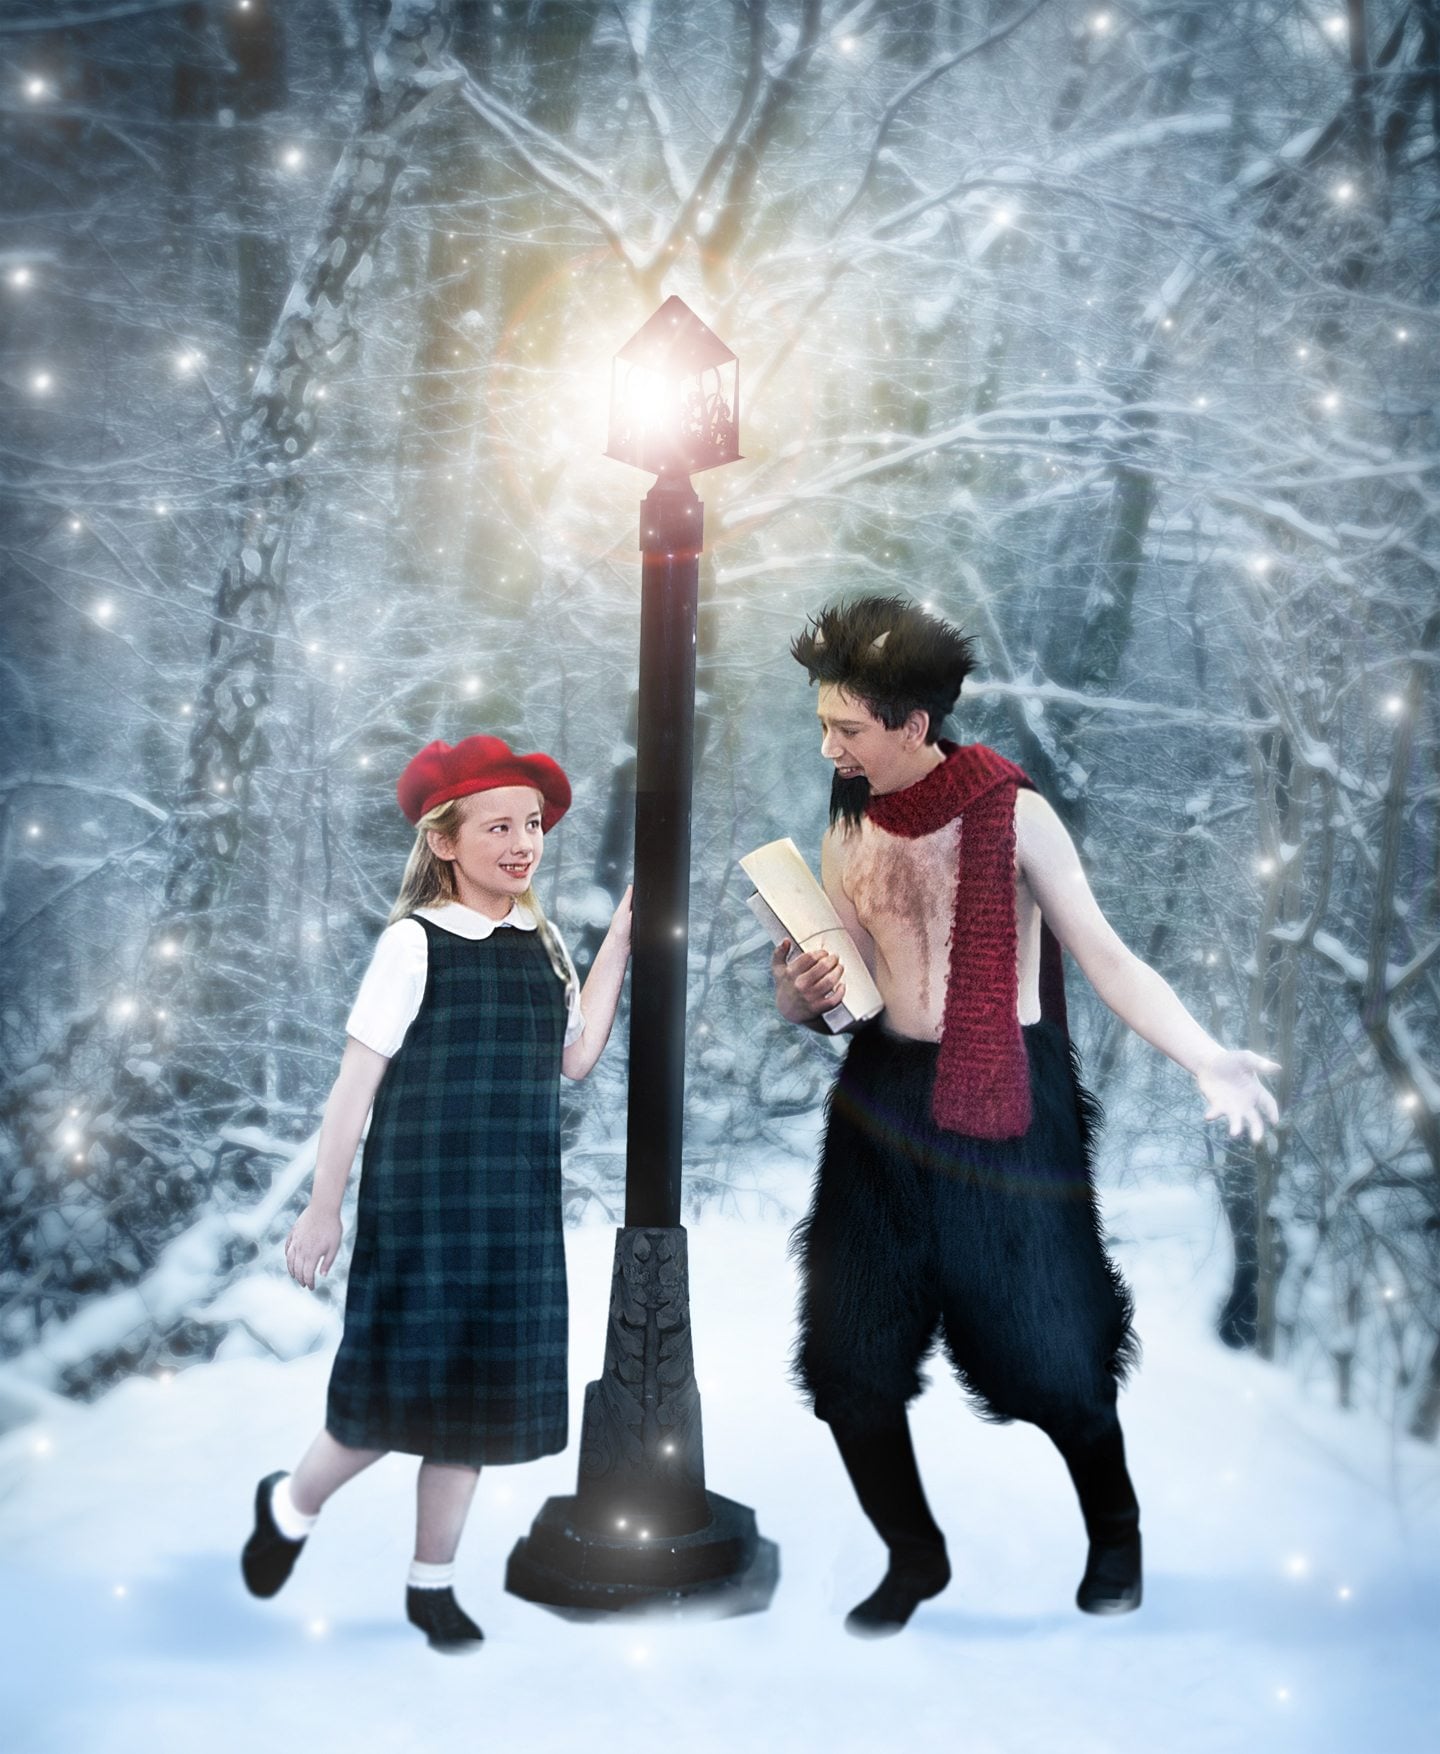 Christian Youth Theatre will stage an adaptation of &quot;Narnia&quot; on March 2-11 at Fort Vancouver High School in Vancouver.